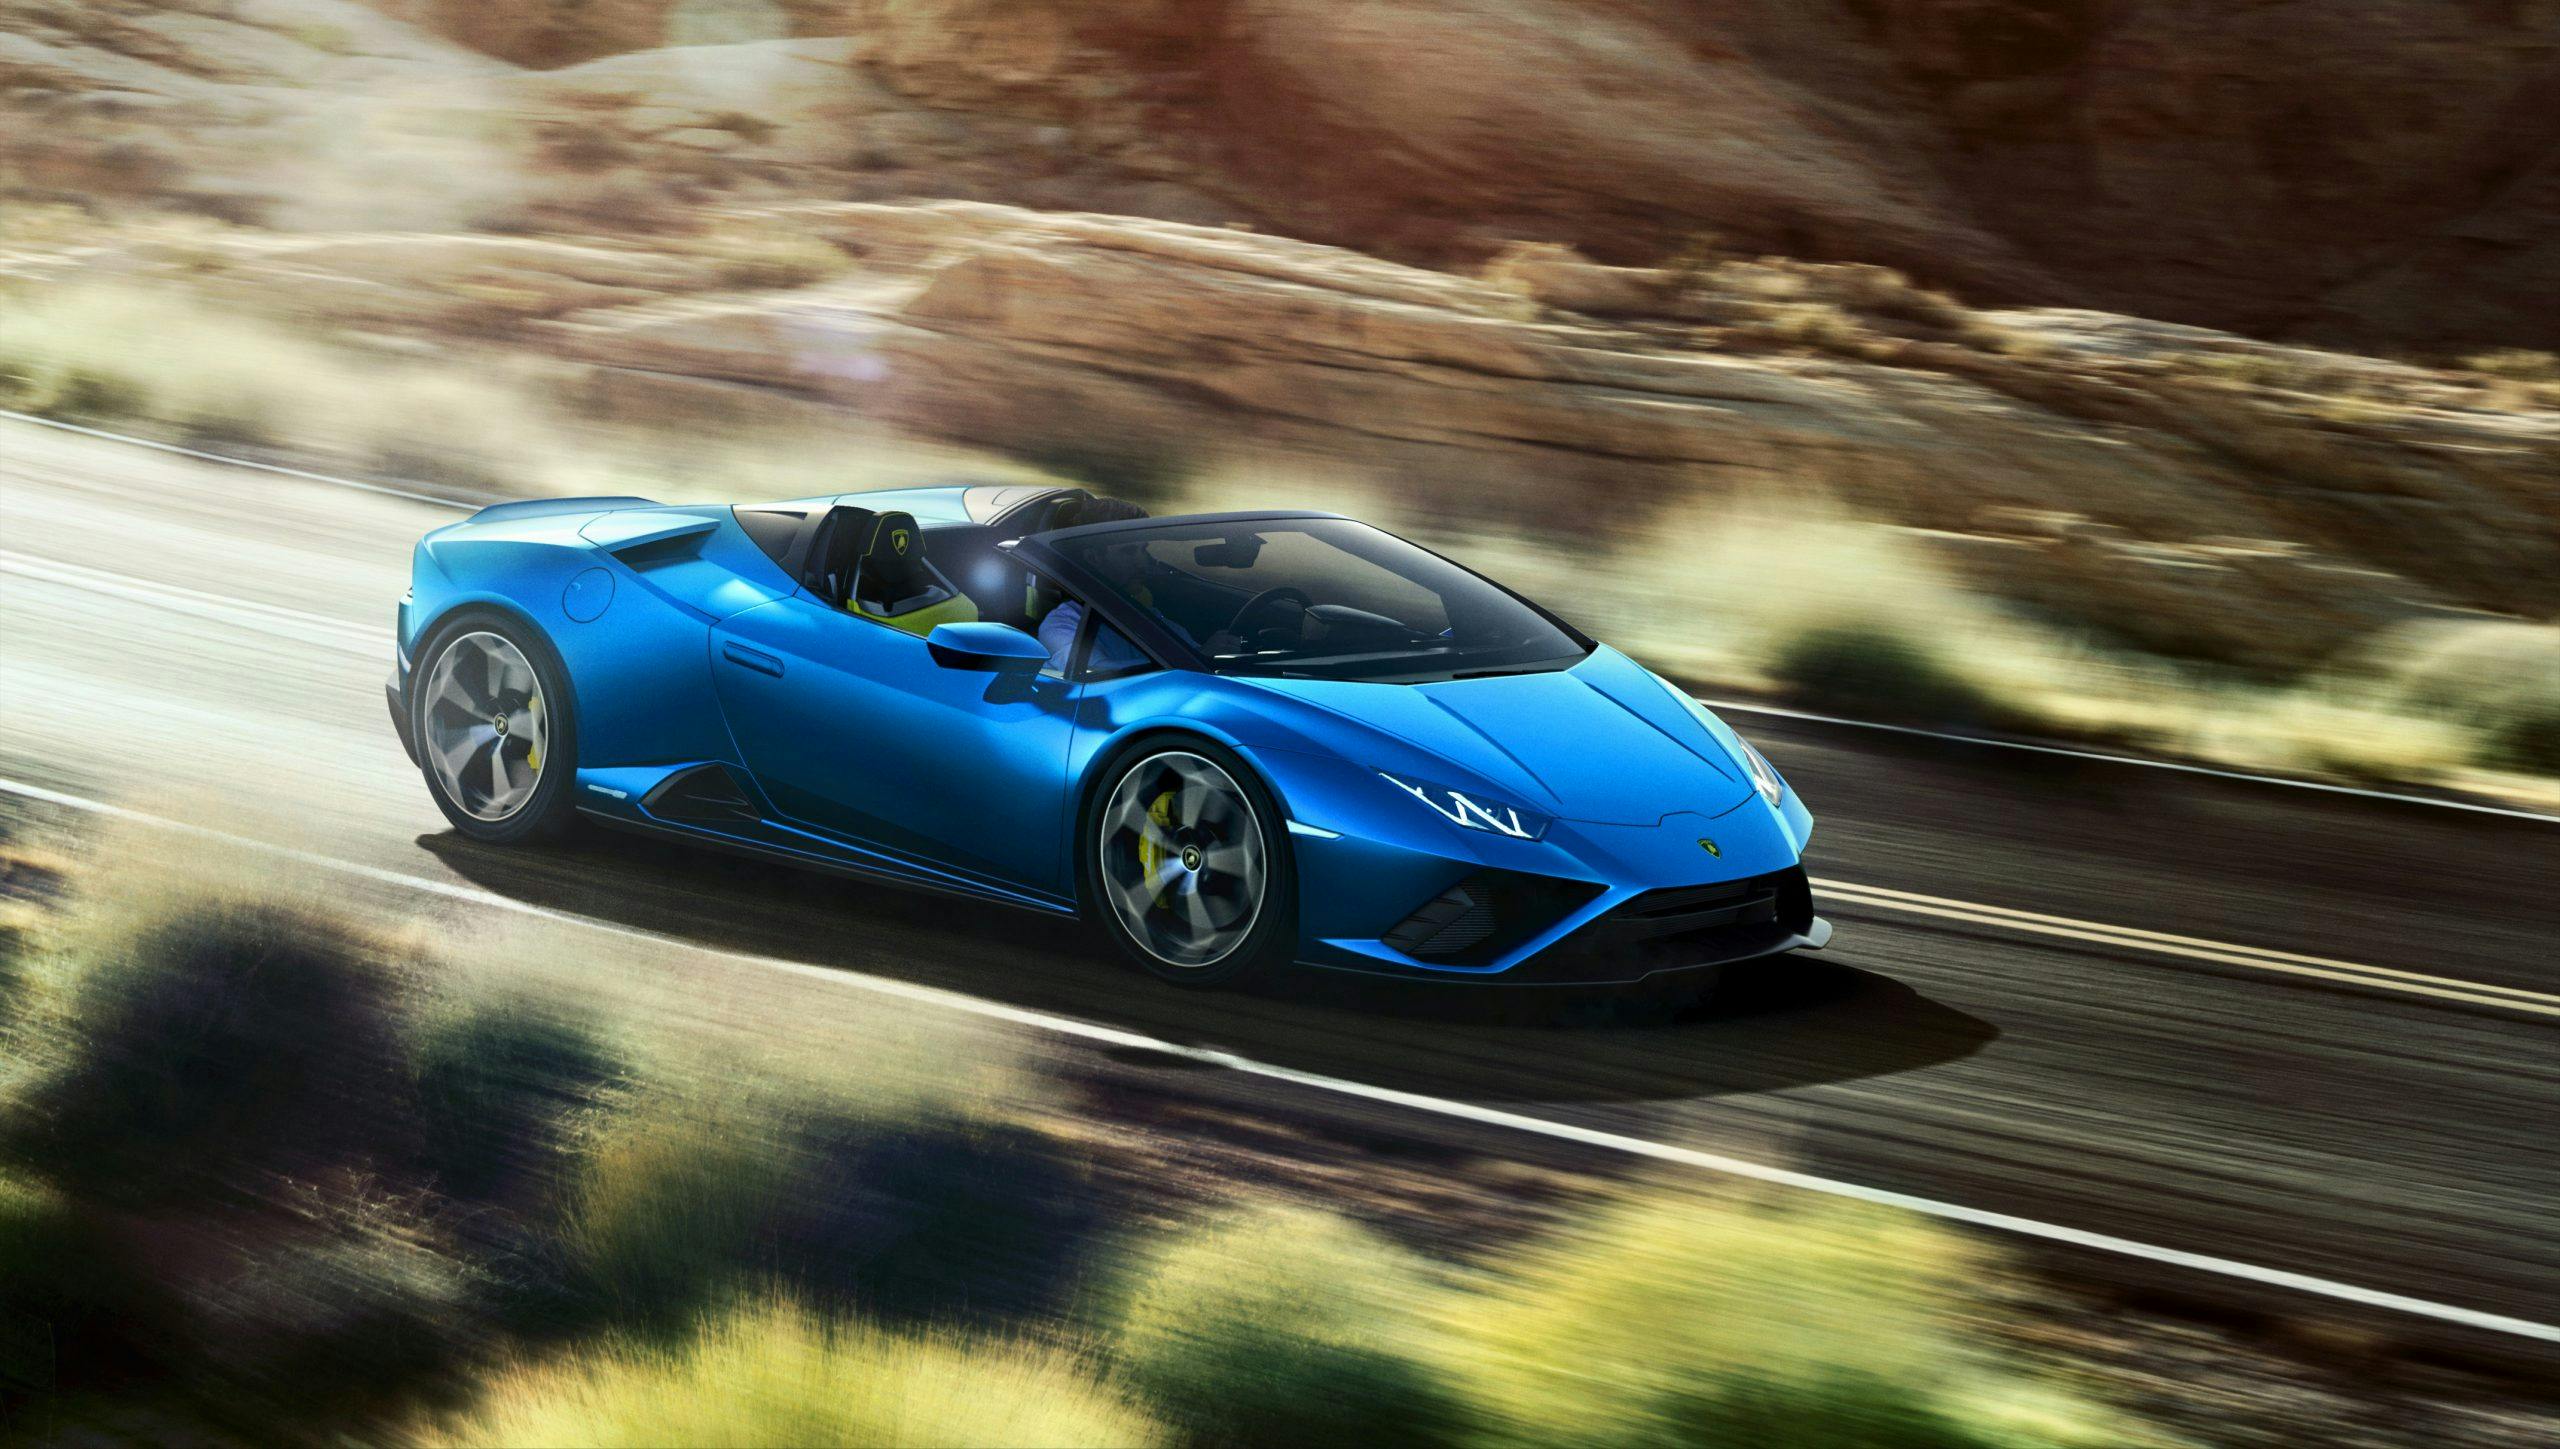 Lamborghini drops the Huracán Evo RWD's top with the new 610-hp Spyder -  Hagerty Media